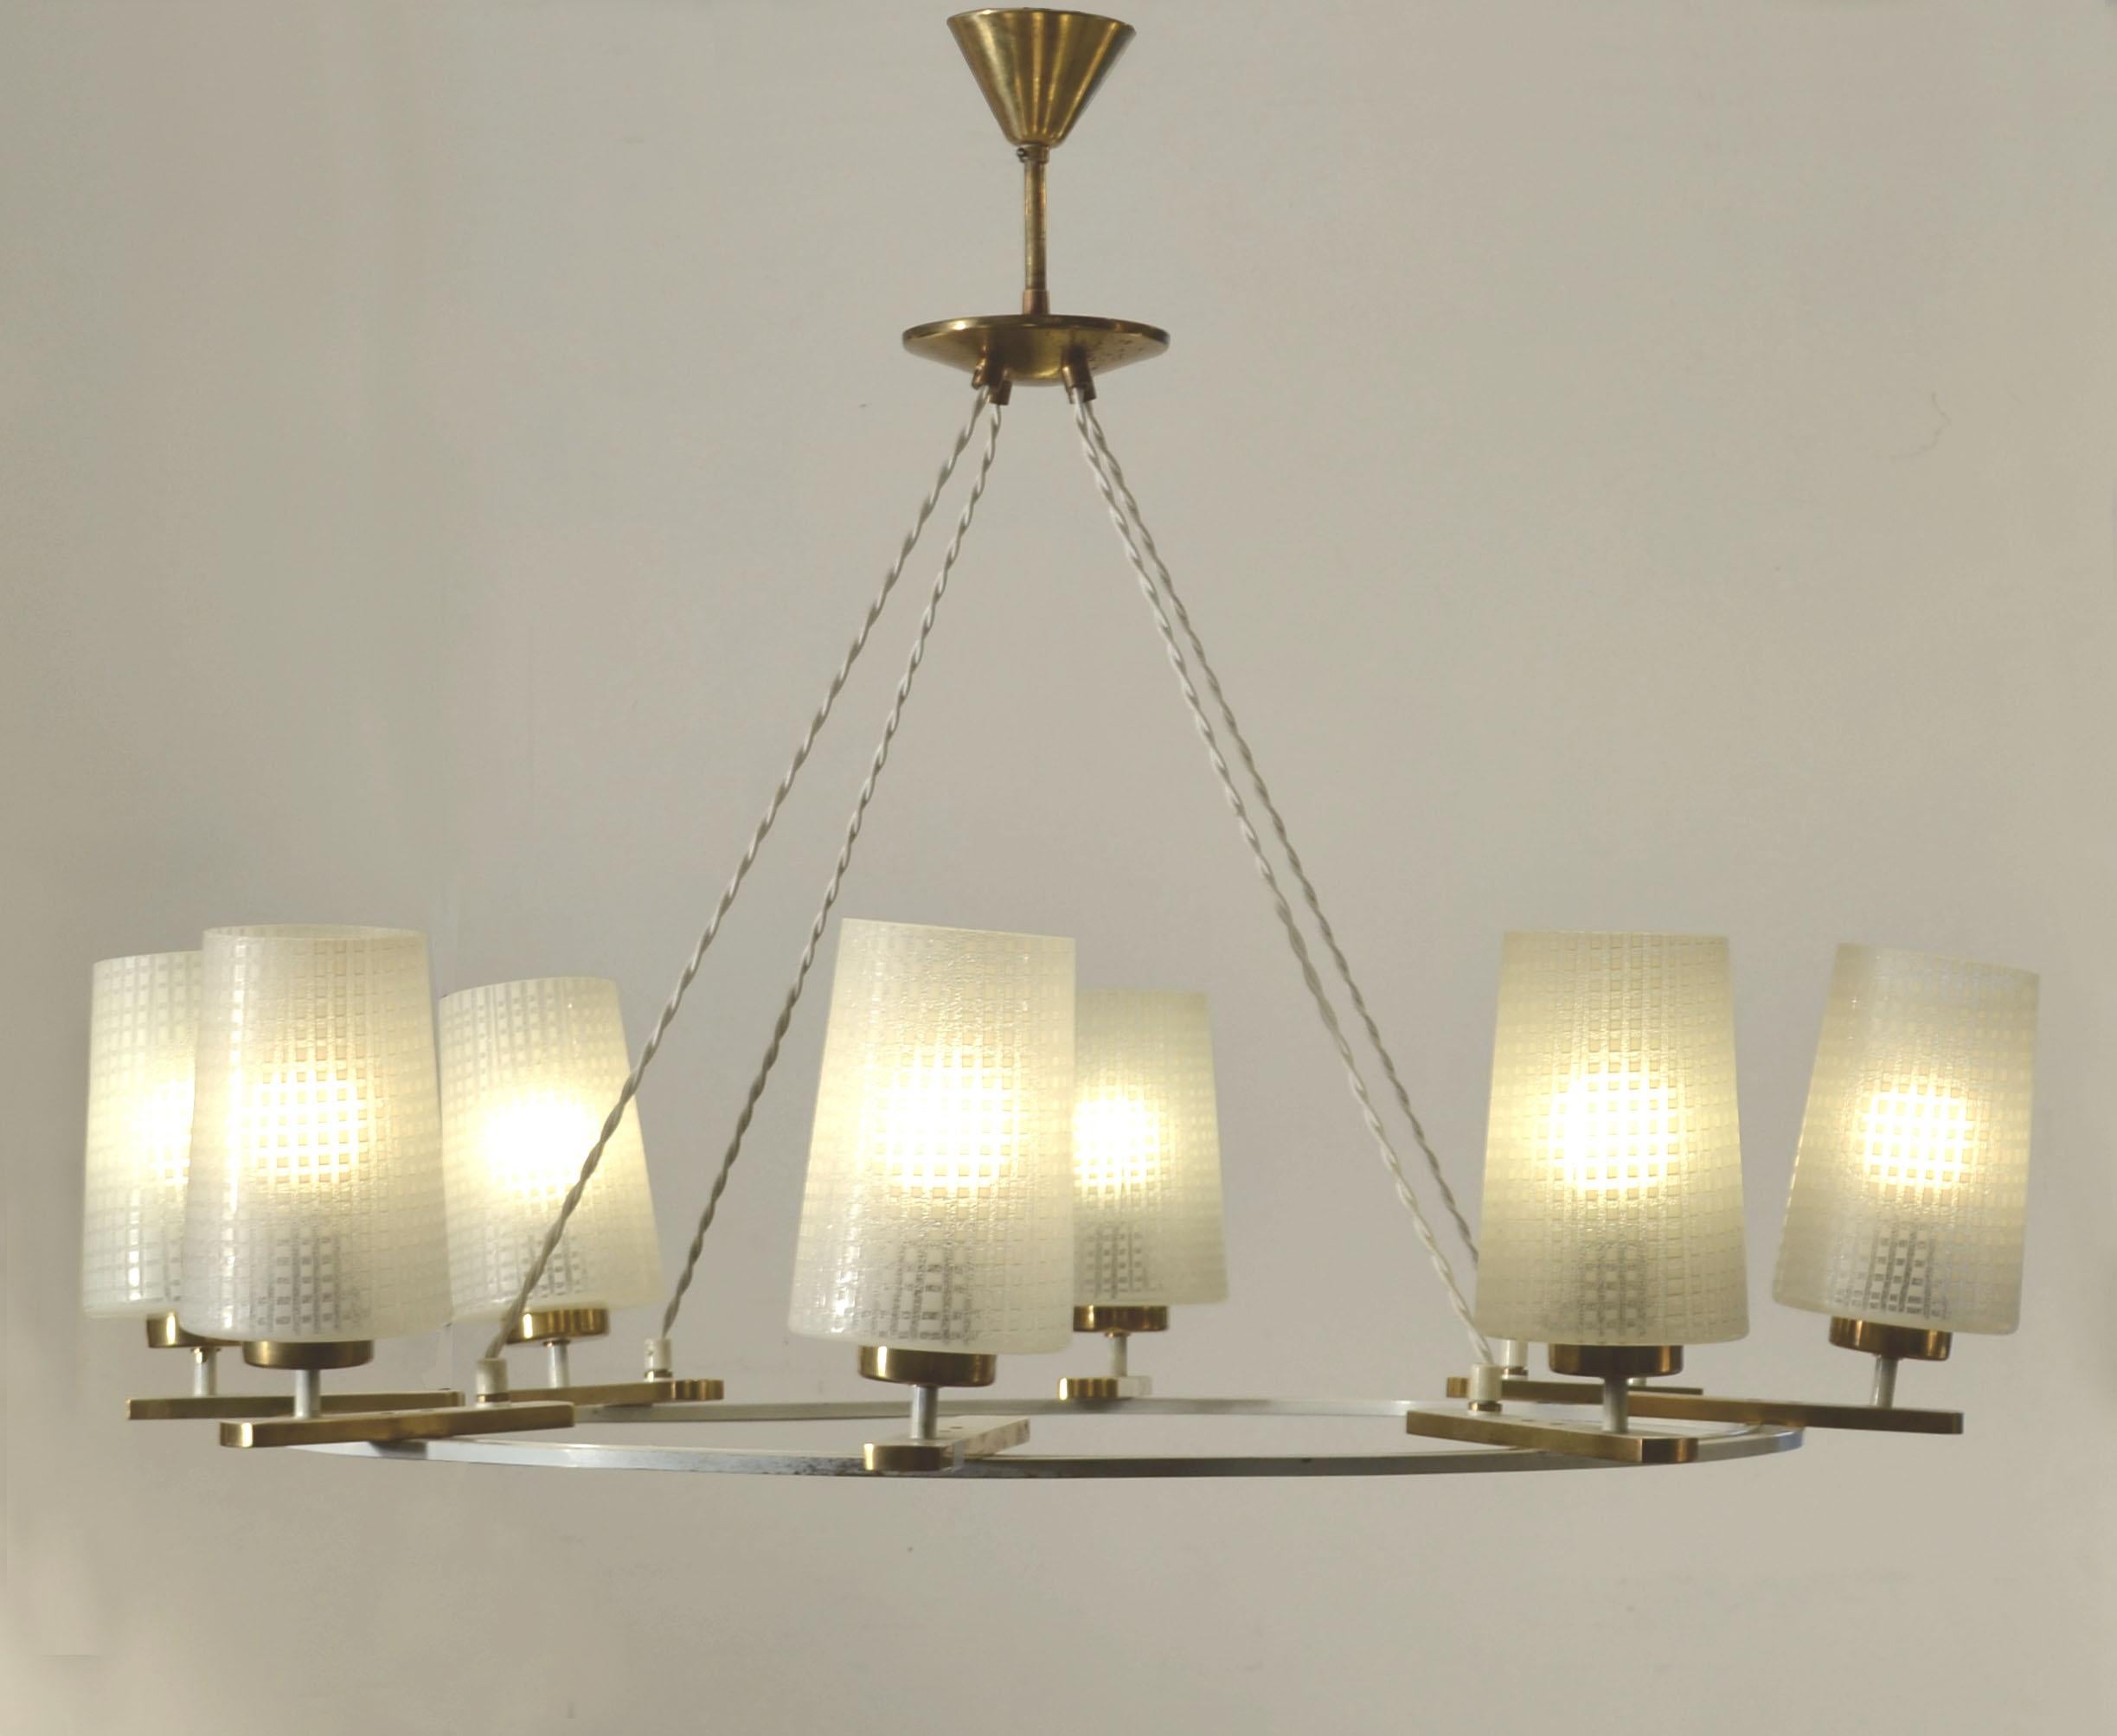 Elegant 1950s chandelier with clean lines has a brass circular frame that is partly painted cream. It holds 8 textures opaline frosted shades, etched with a square pattern. The cylinder glass shades radiate from the brass and cream metal ring. The